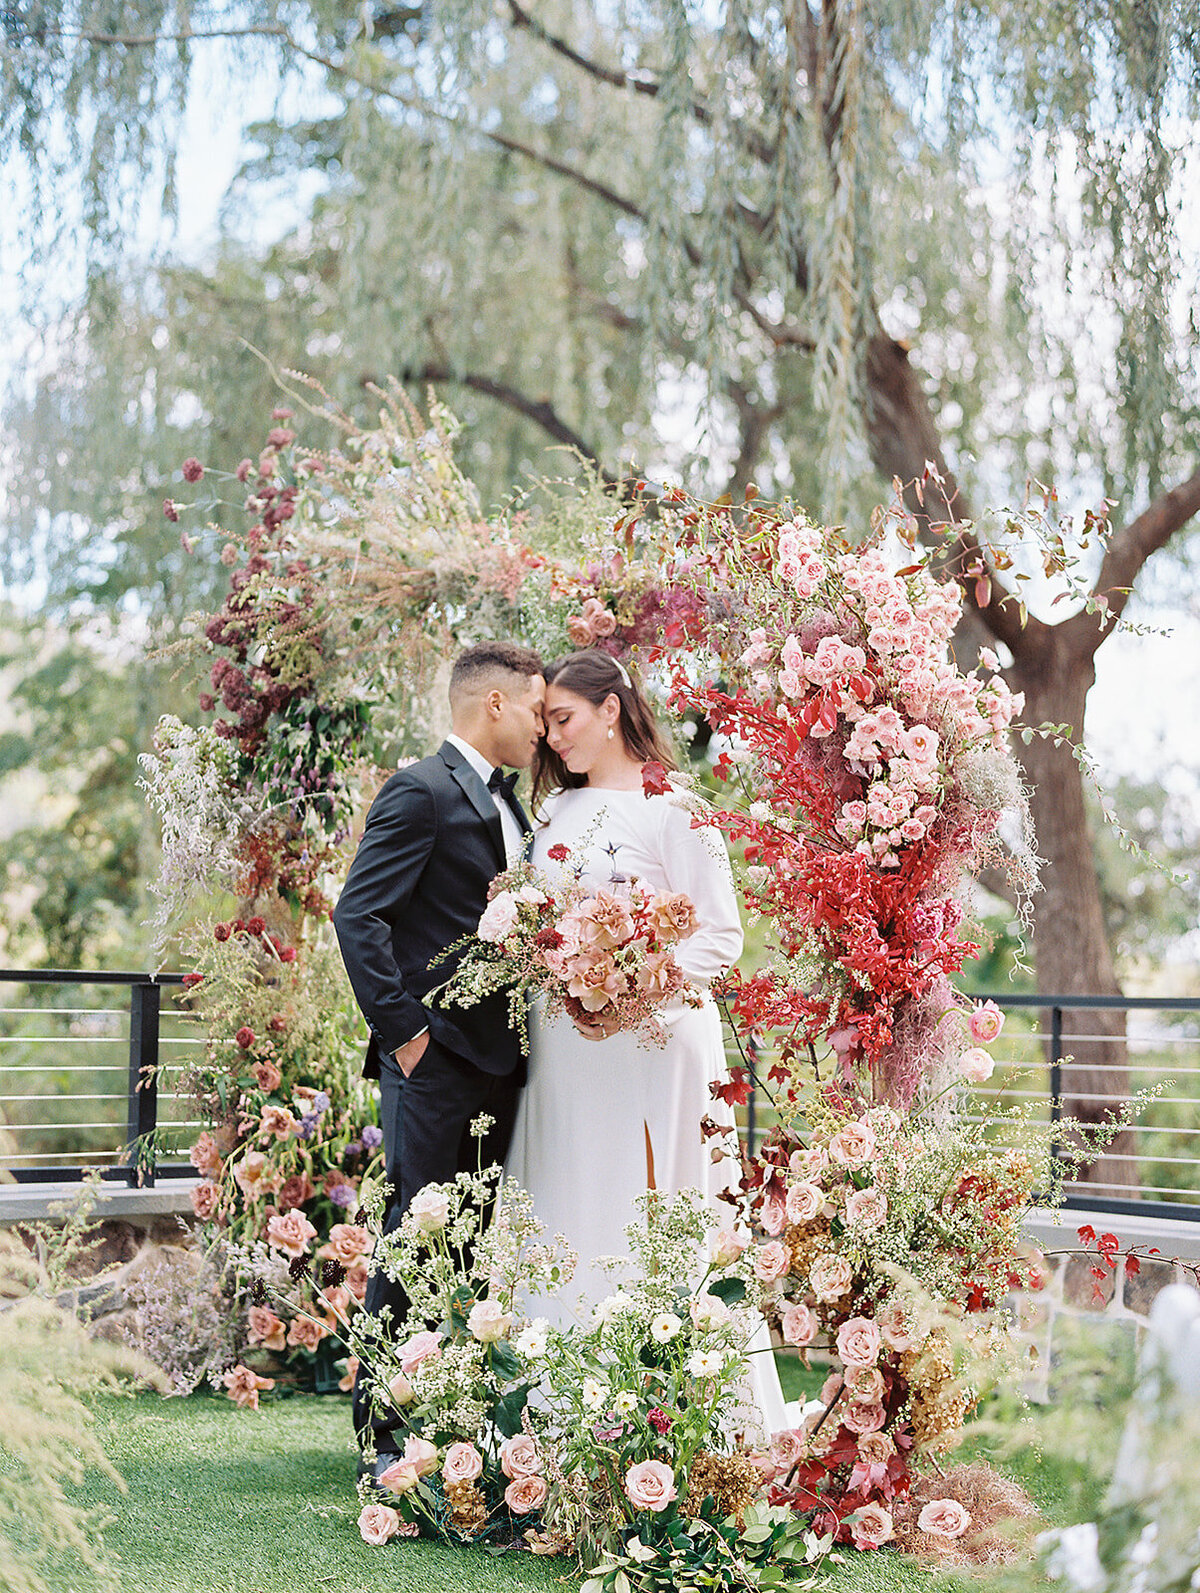 River House Wedding - New Hope, PA - October 2020 - Photography by Magdalena Studios - Design by Shannon Wellington - 19_websize